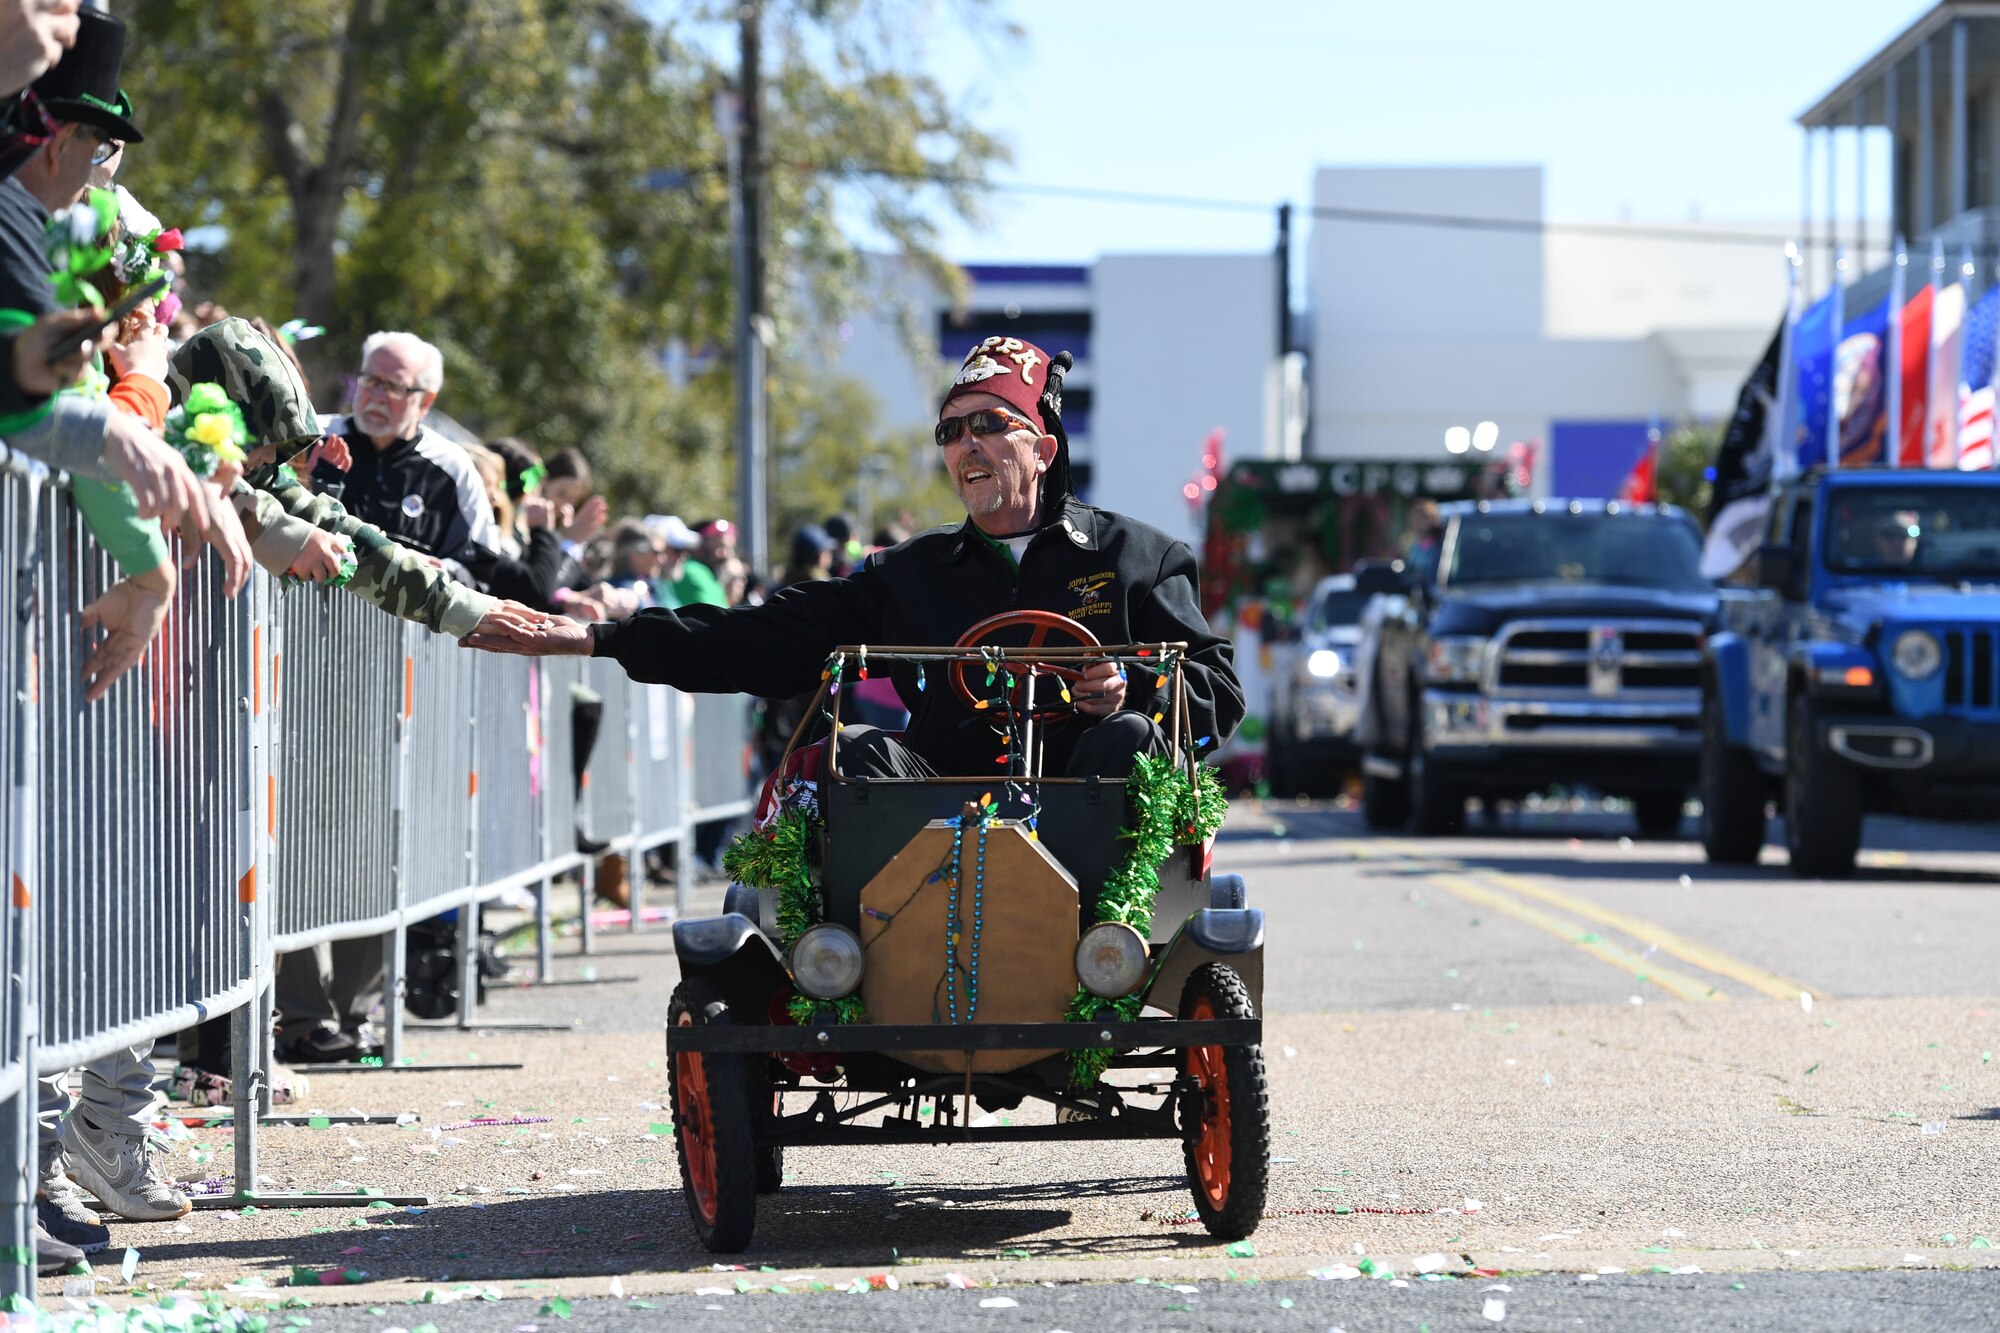 A member of the Joppa Temple Shrine rides through Biloxi during the Hibernia Marching Society of Mississippi St. Patrick's Day Parade in Biloxi, Mississippi, March 12, 2022. Keesler personnel participated in the local parade to show their support of the communities surrounding the installation. (U.S. Air Force photo by Kemberly Groue)